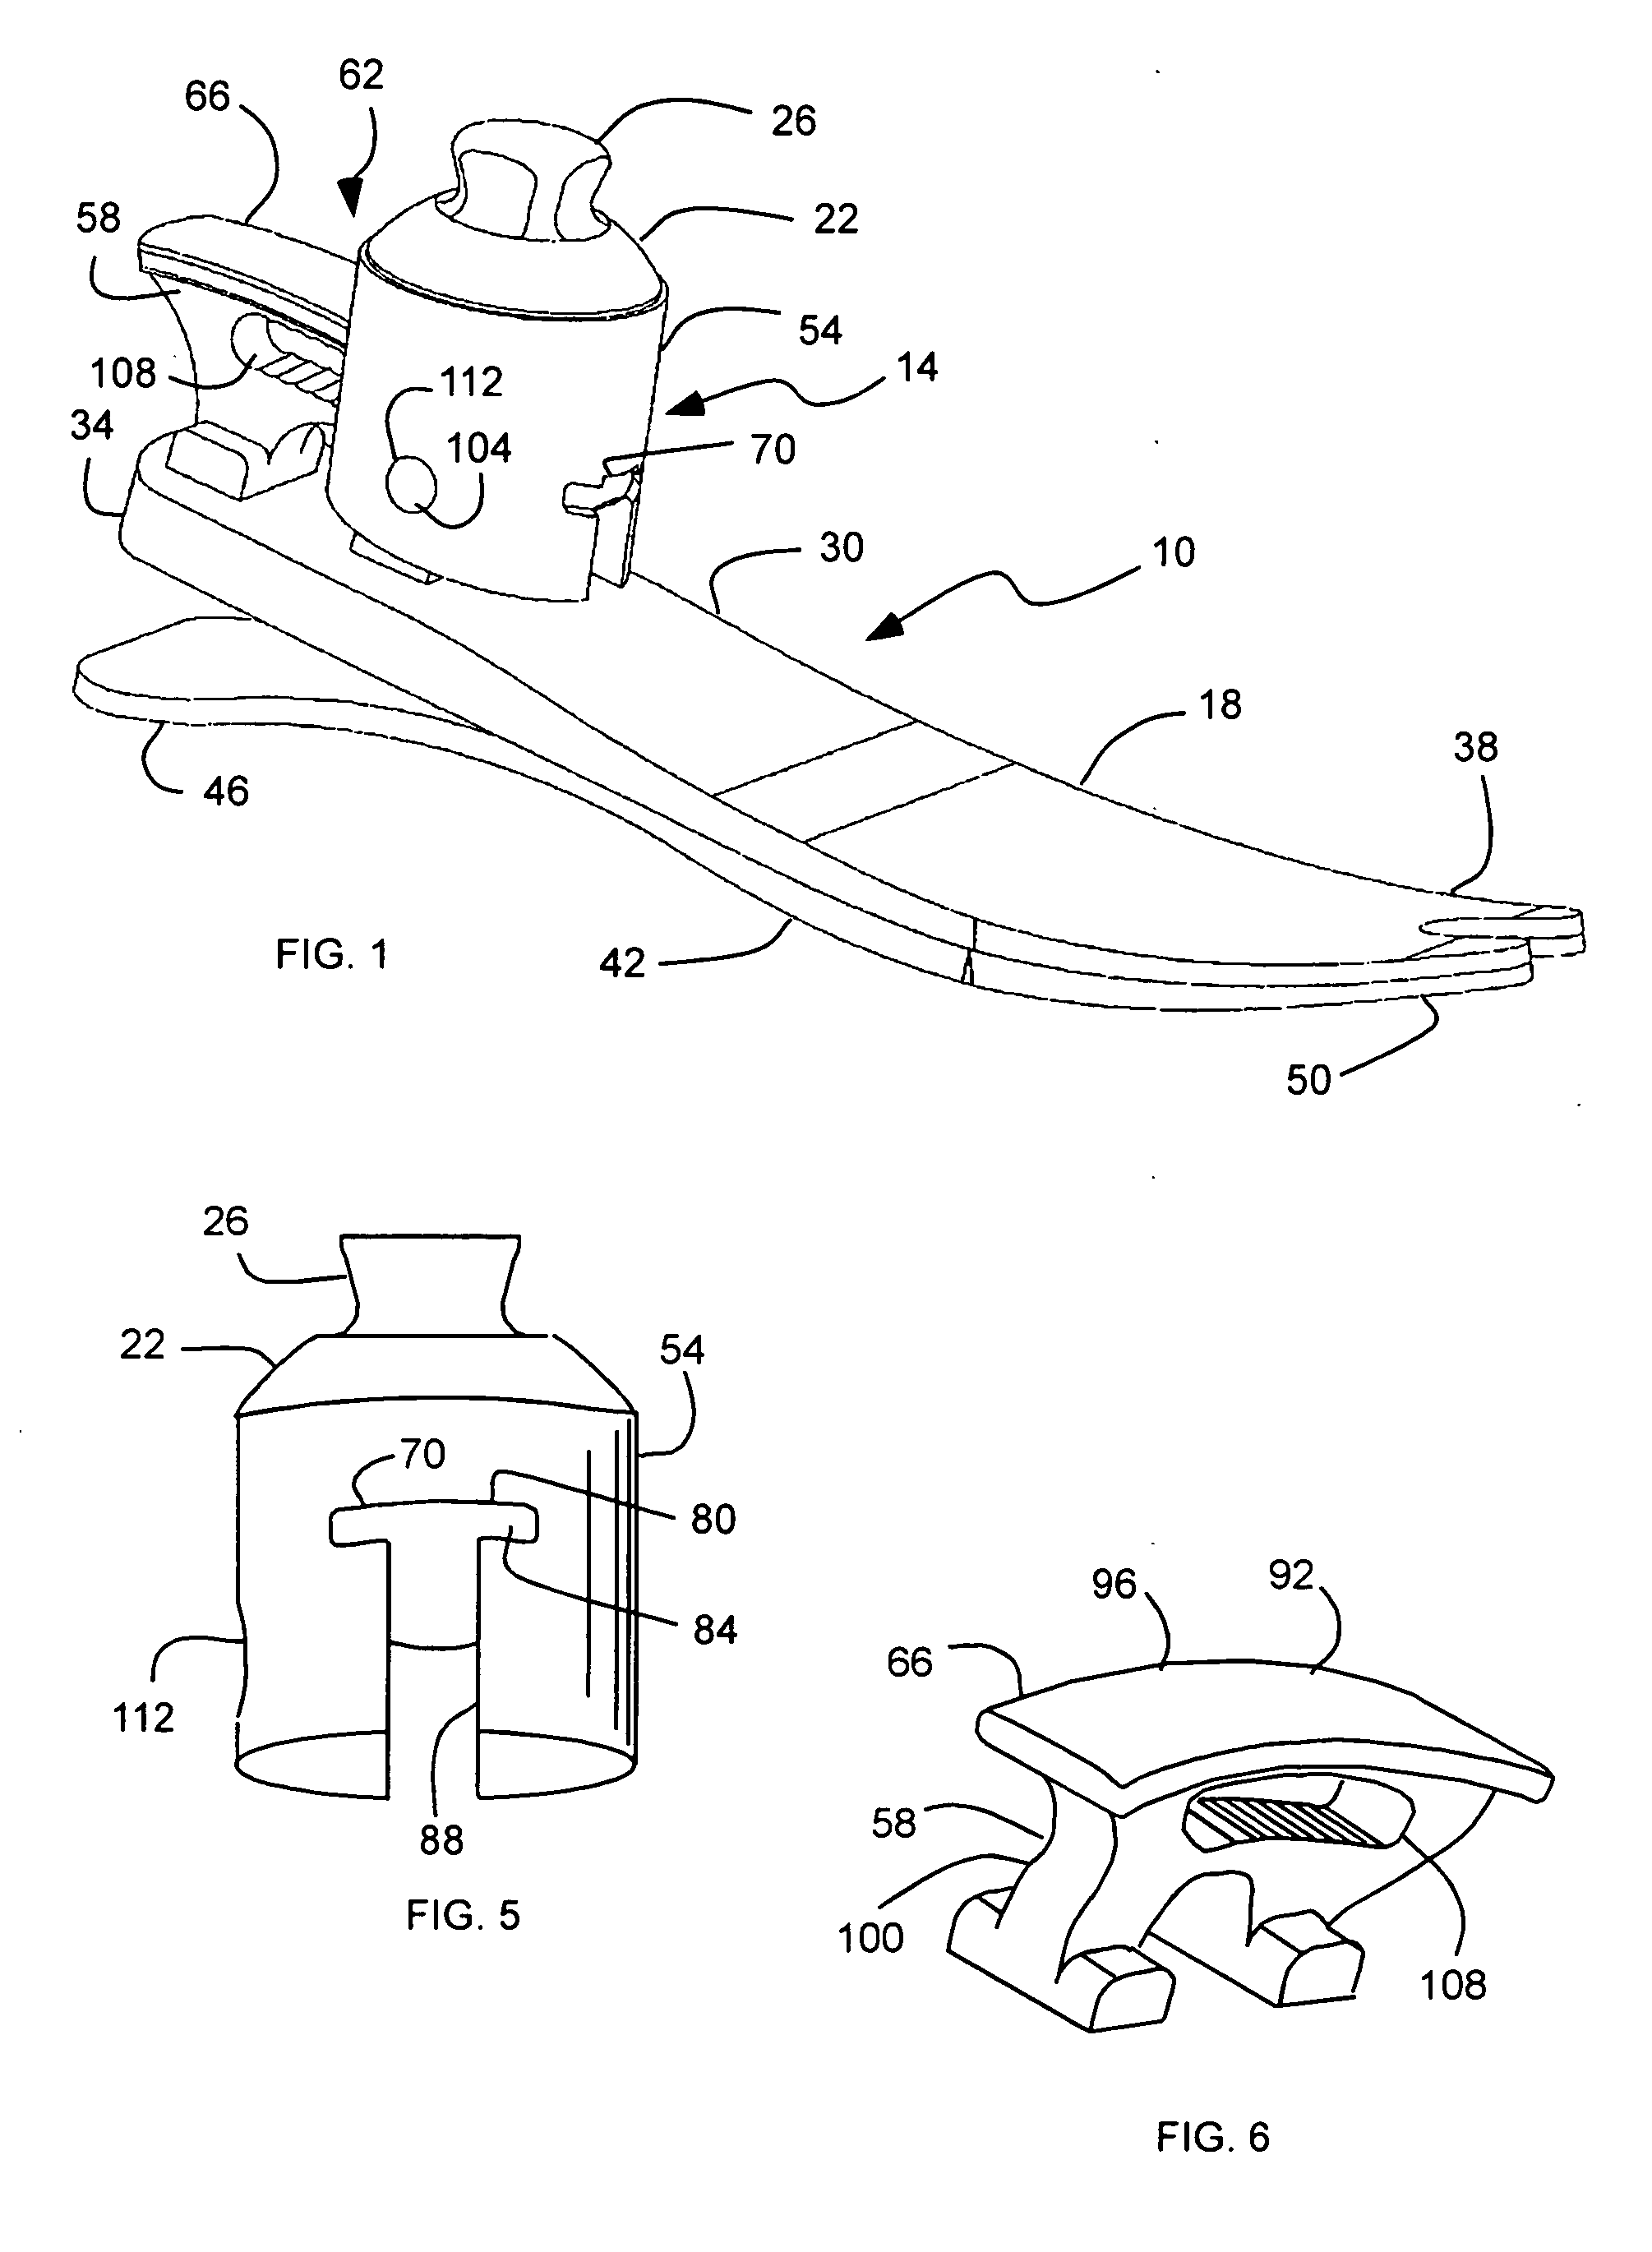 Prosthetic foot with an adjustable ankle and method